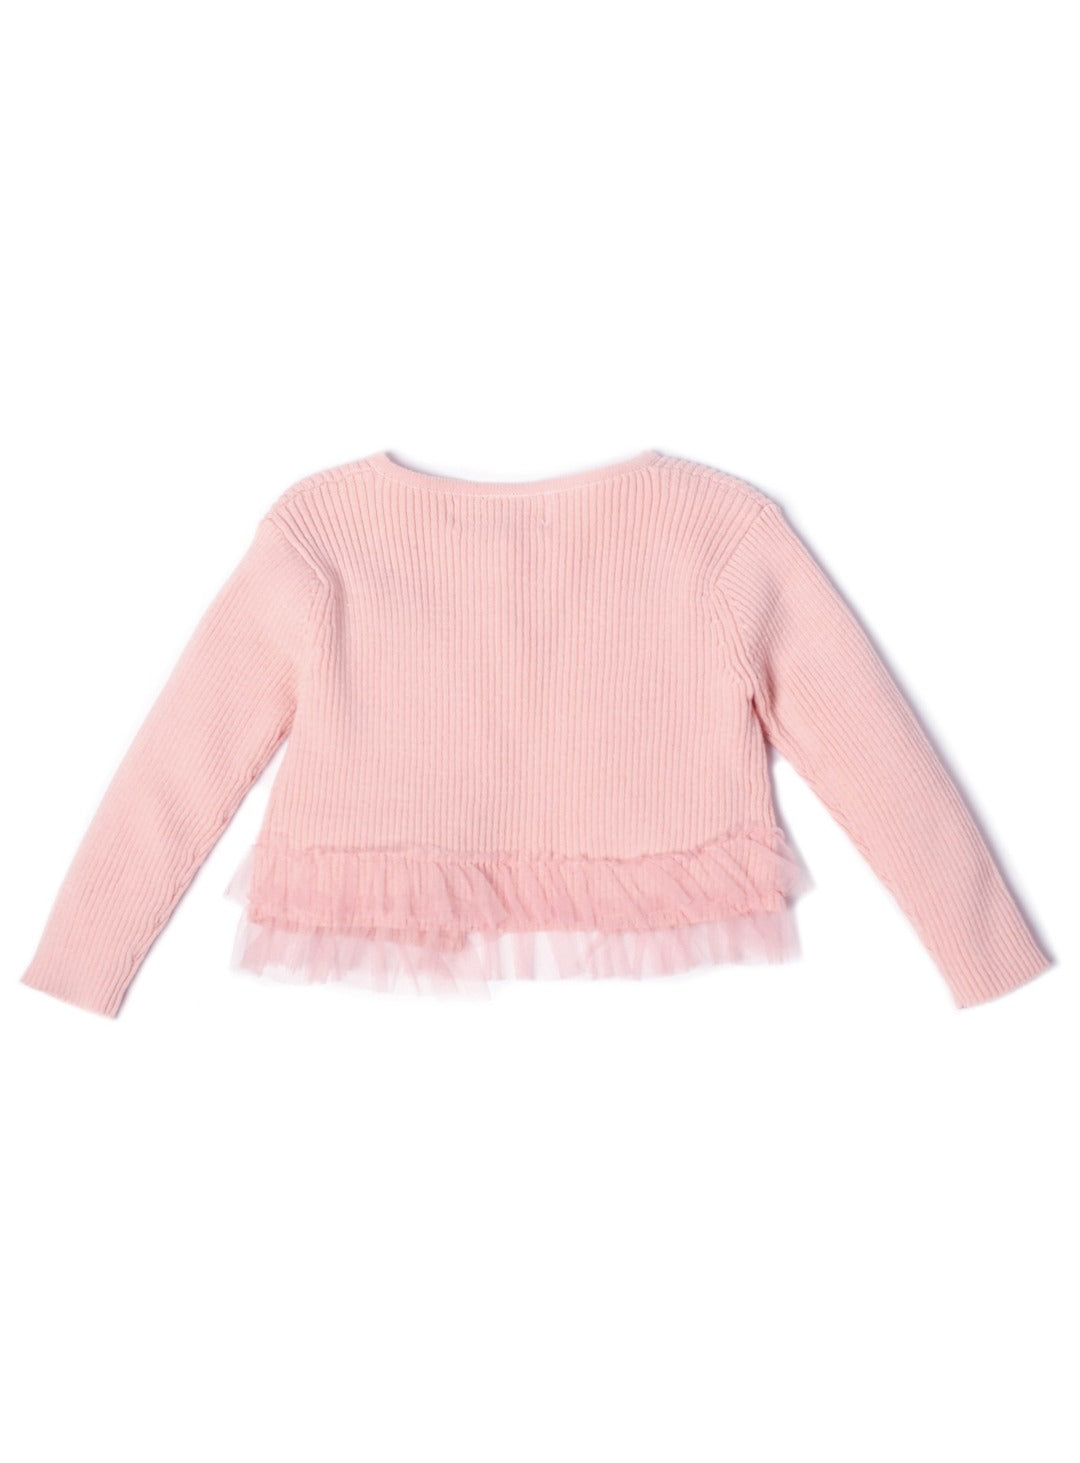 pink cropped cardigan with cute ruffles